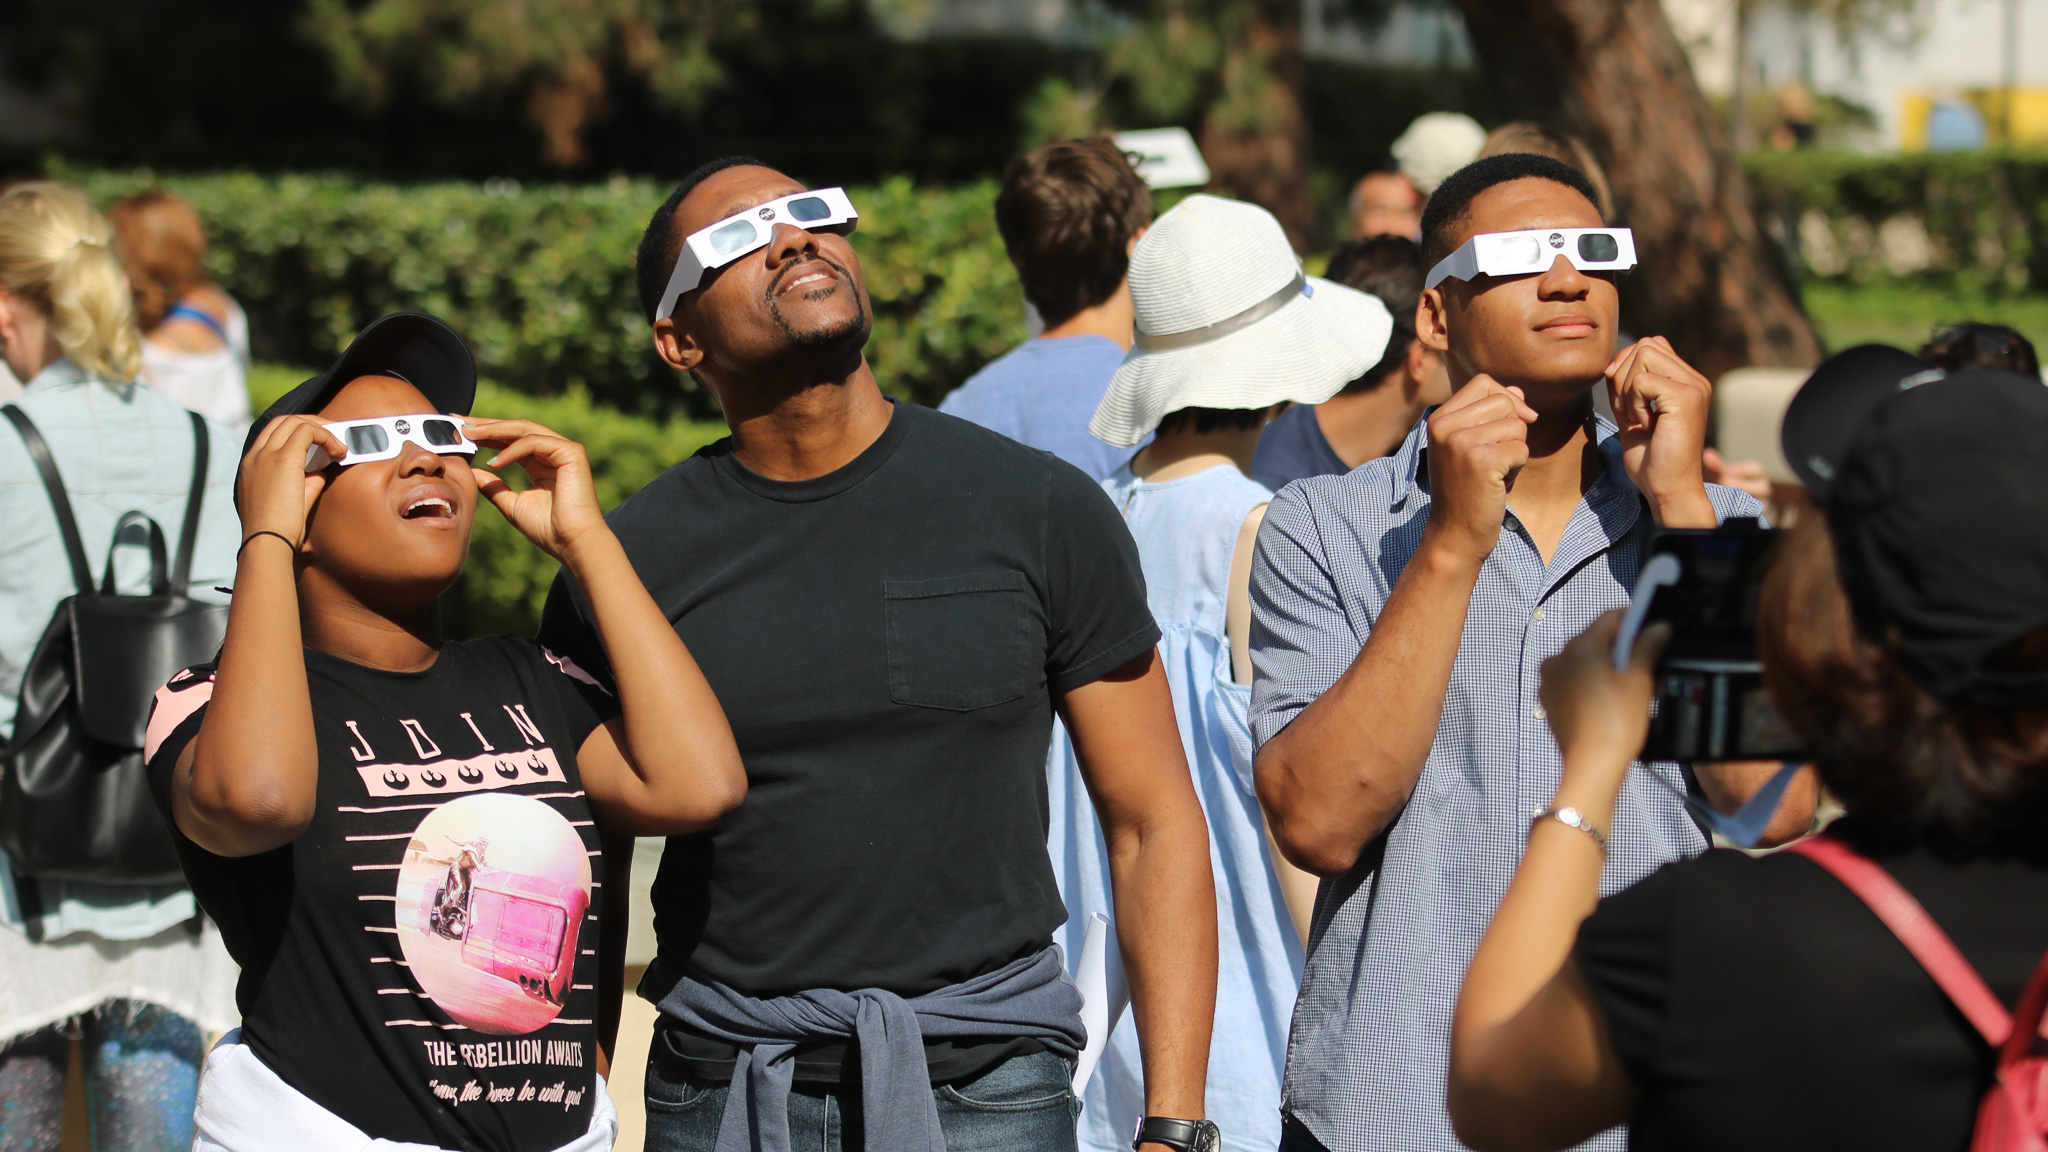 Total Solar Eclipse showing people wearing glasses and looking at the eclipse